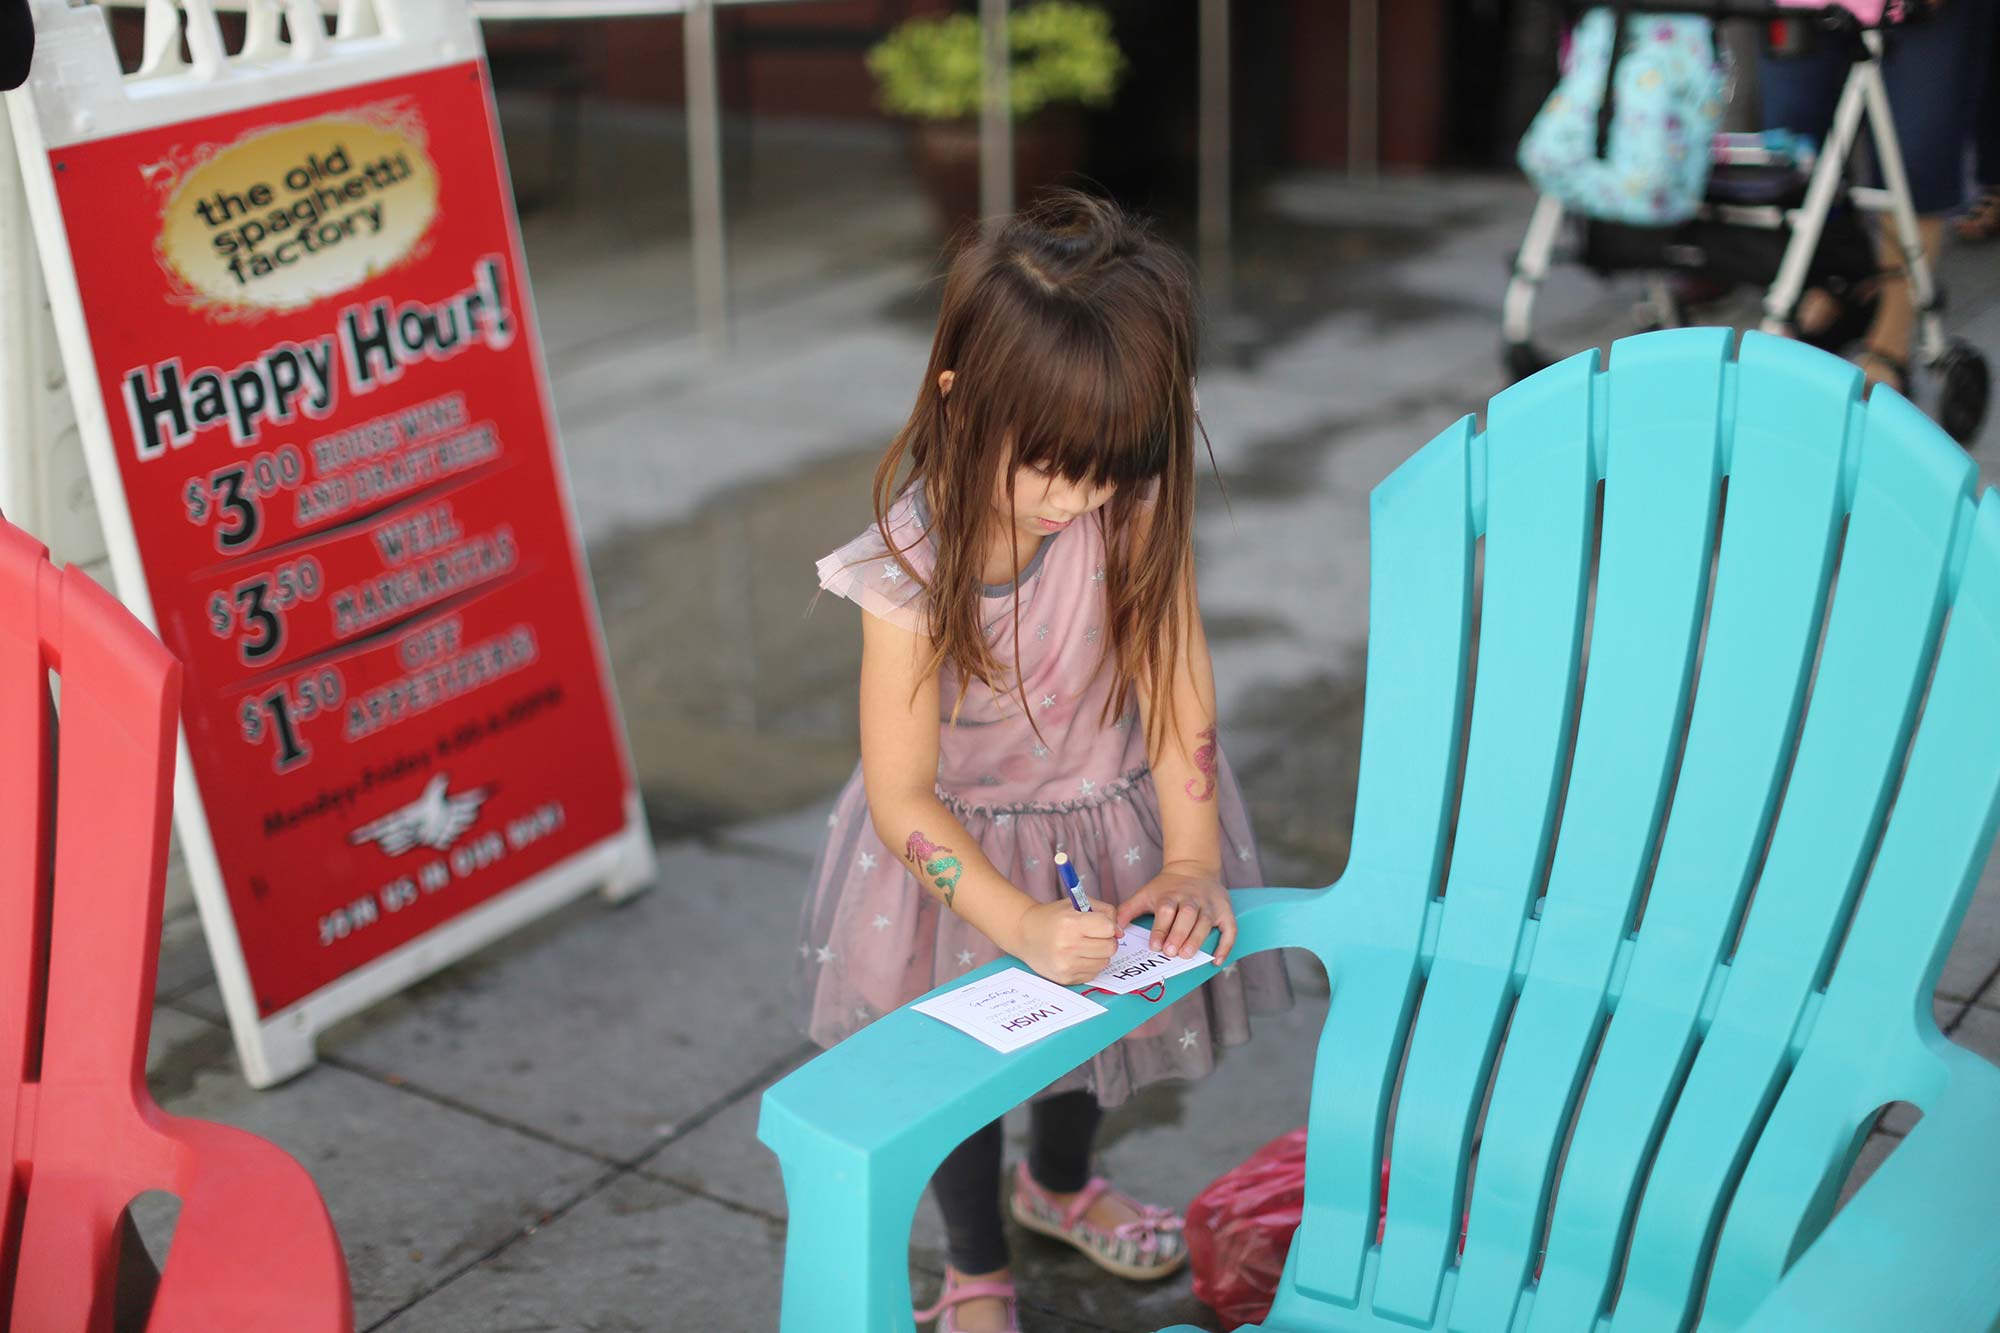 A little girl sitting on a bench.